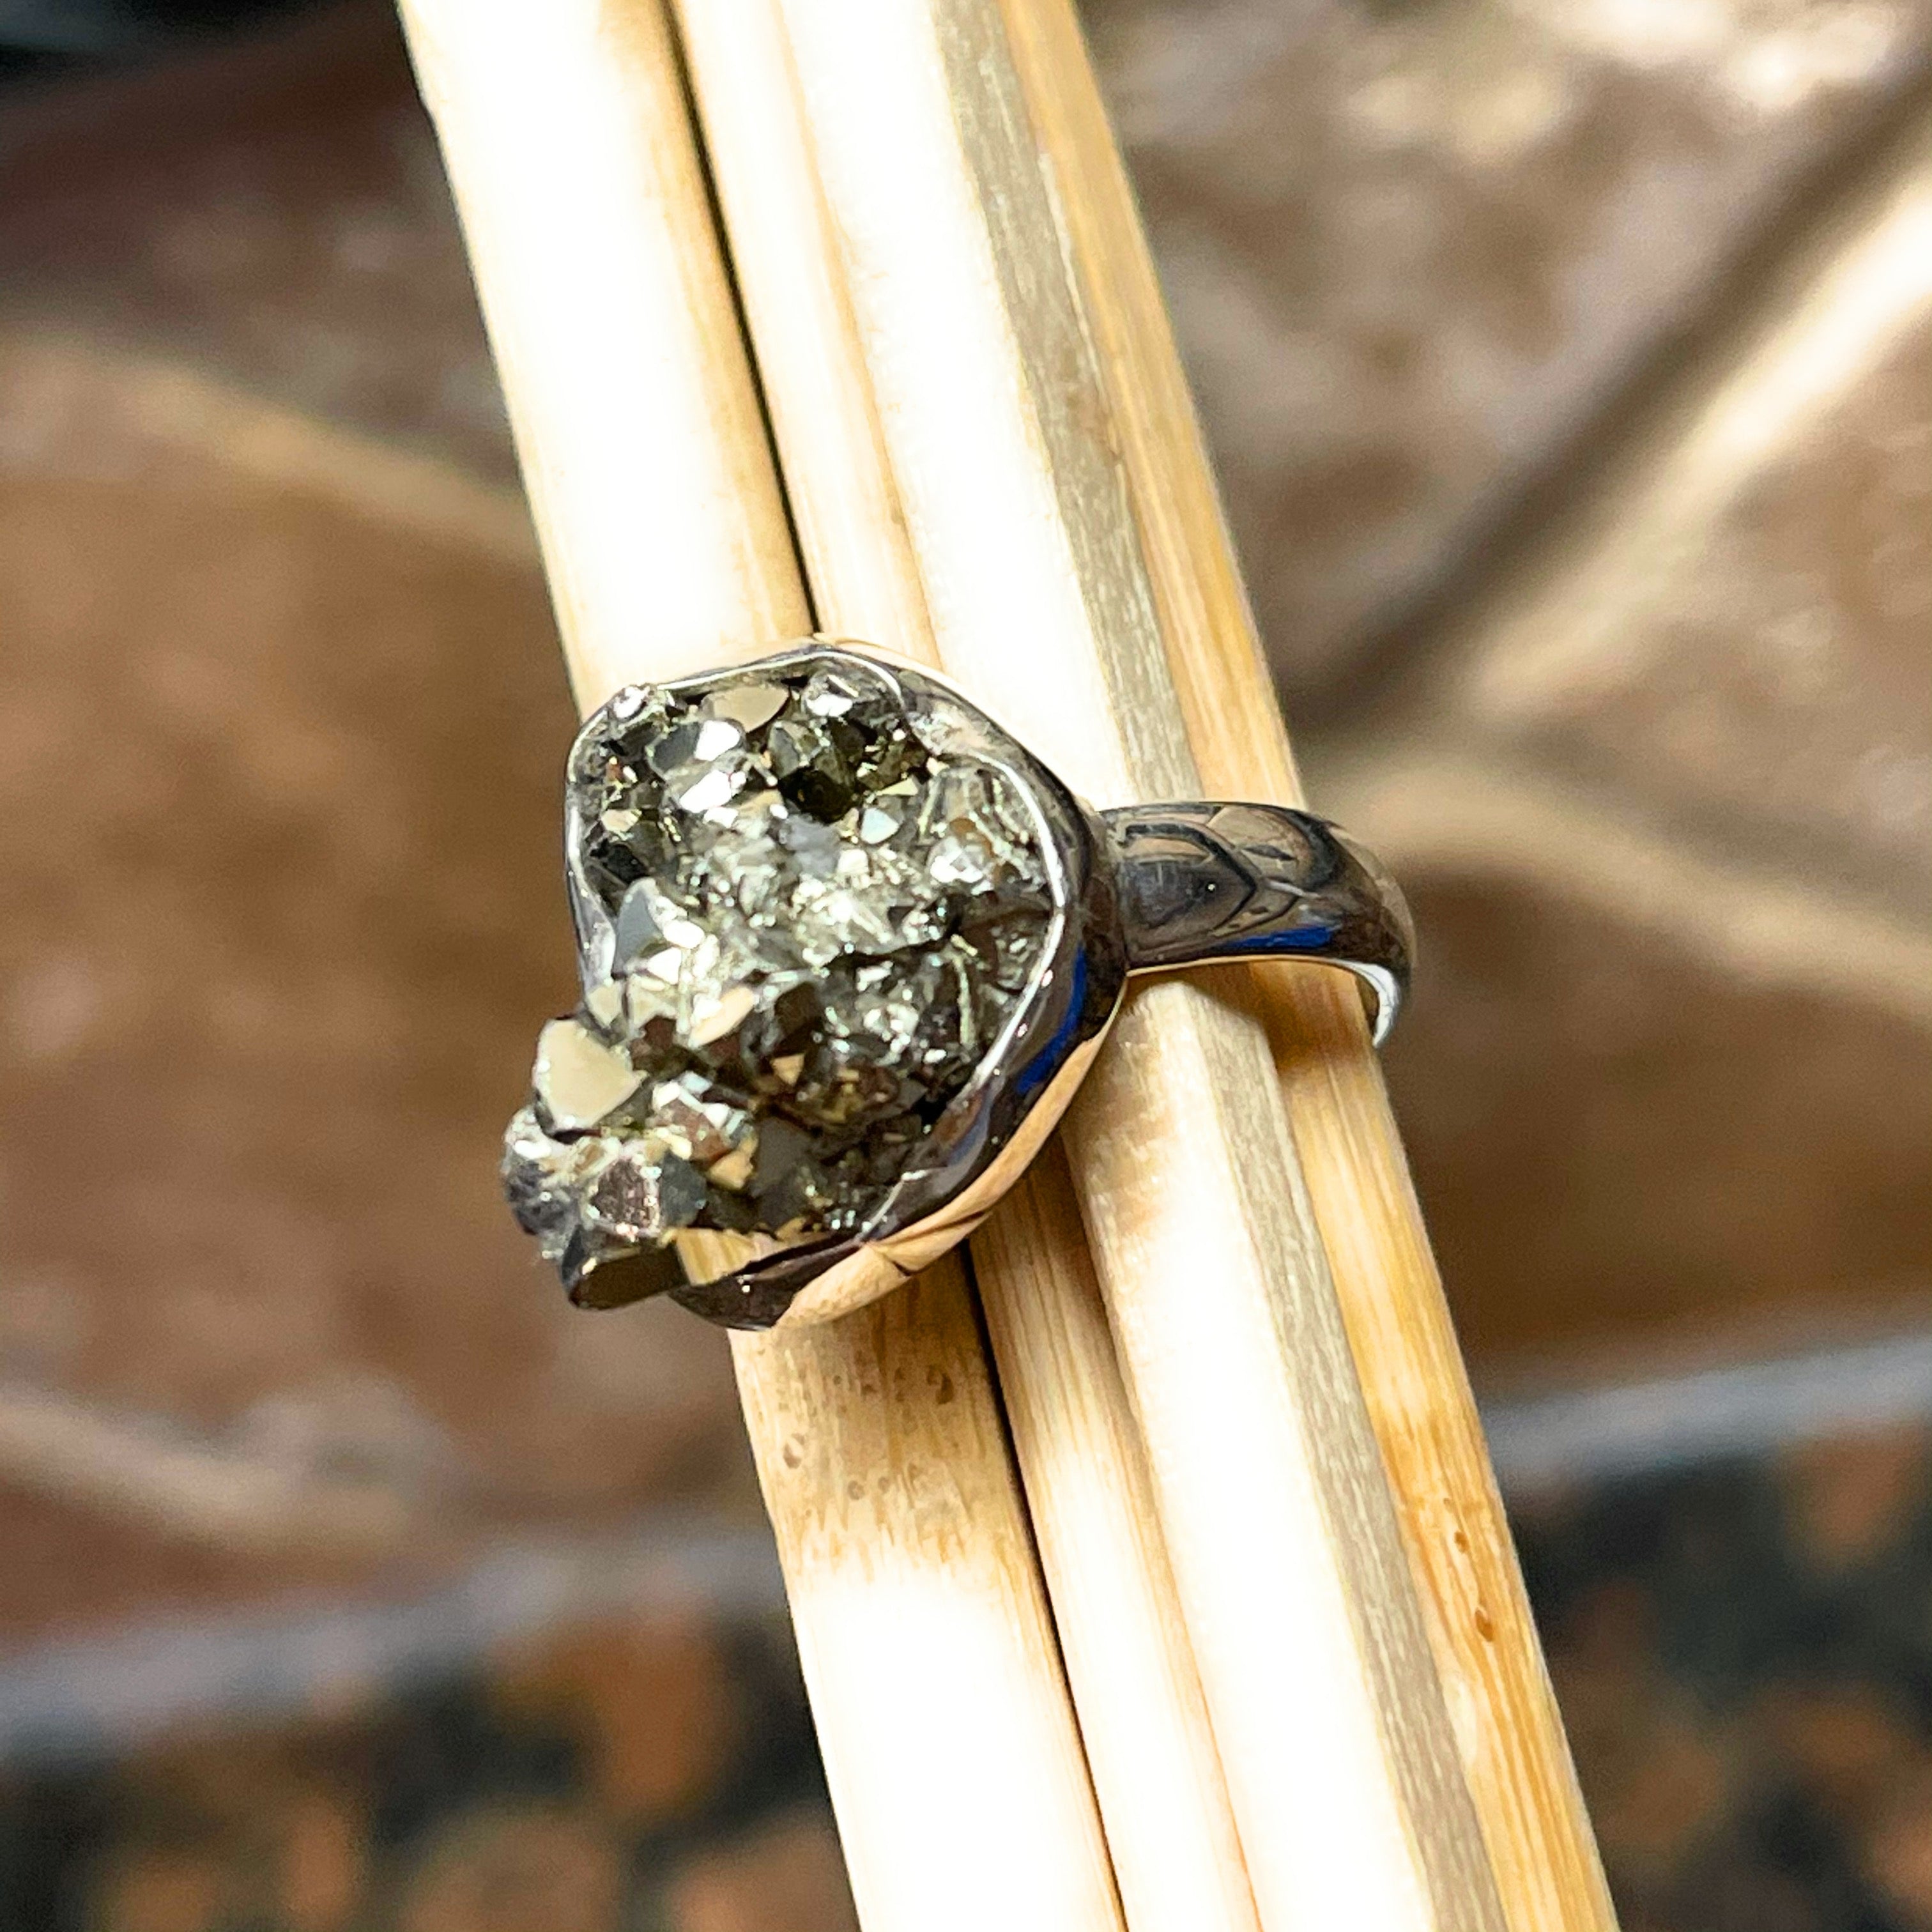 Genuine Pyrite Druzy 925 Solid Sterling Silver Unisex Ring Size 8 - Natural Rocks by Kala